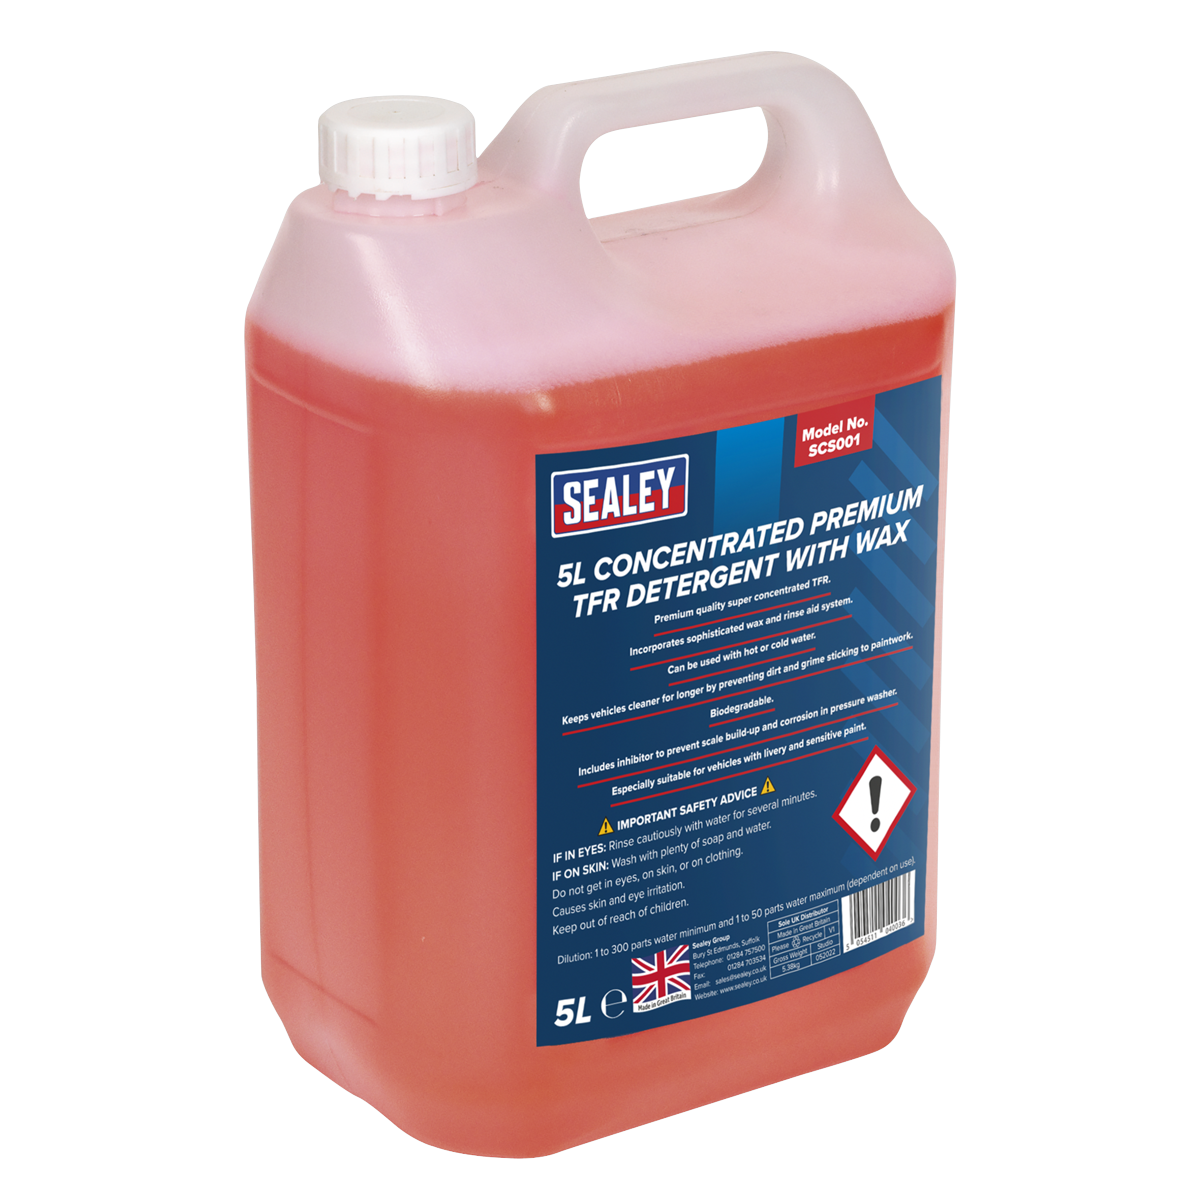 Sealey TFR Premium Detergent with Wax Concentrated 5L